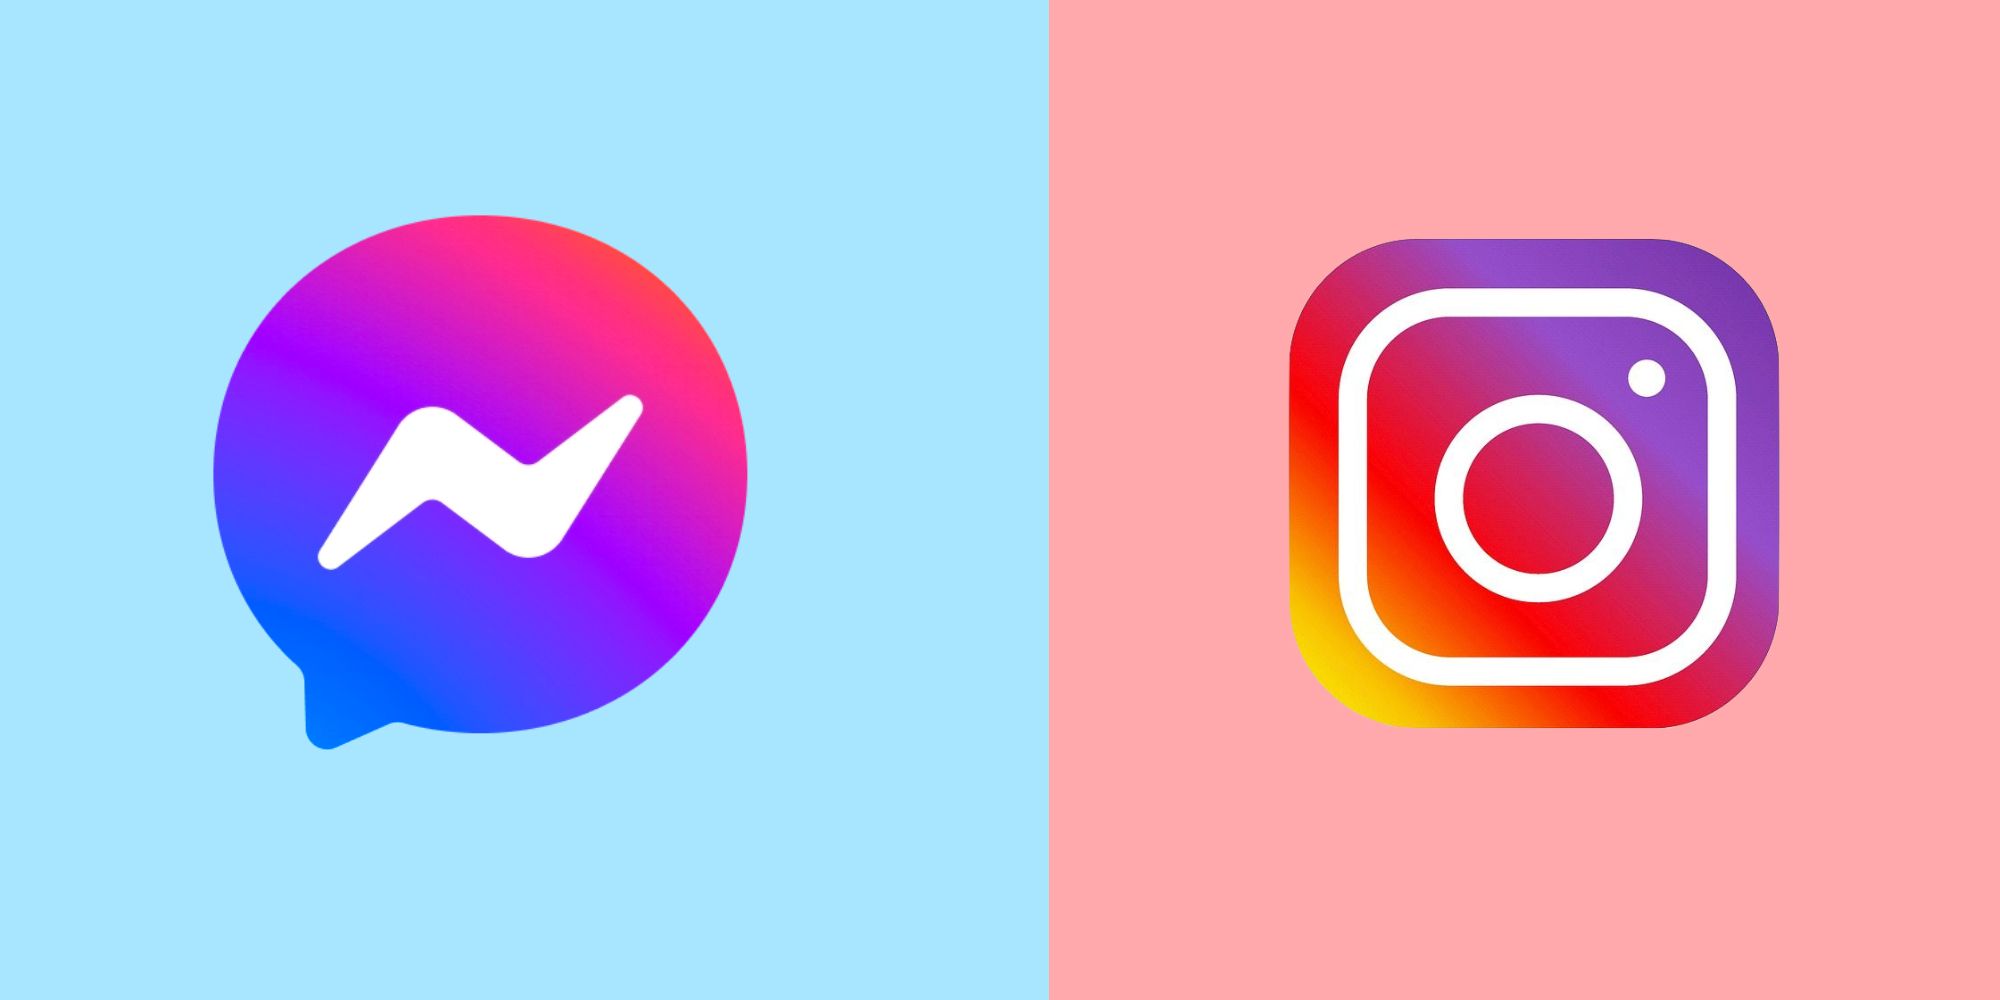 App icons for Facebook Messenger and Instagram